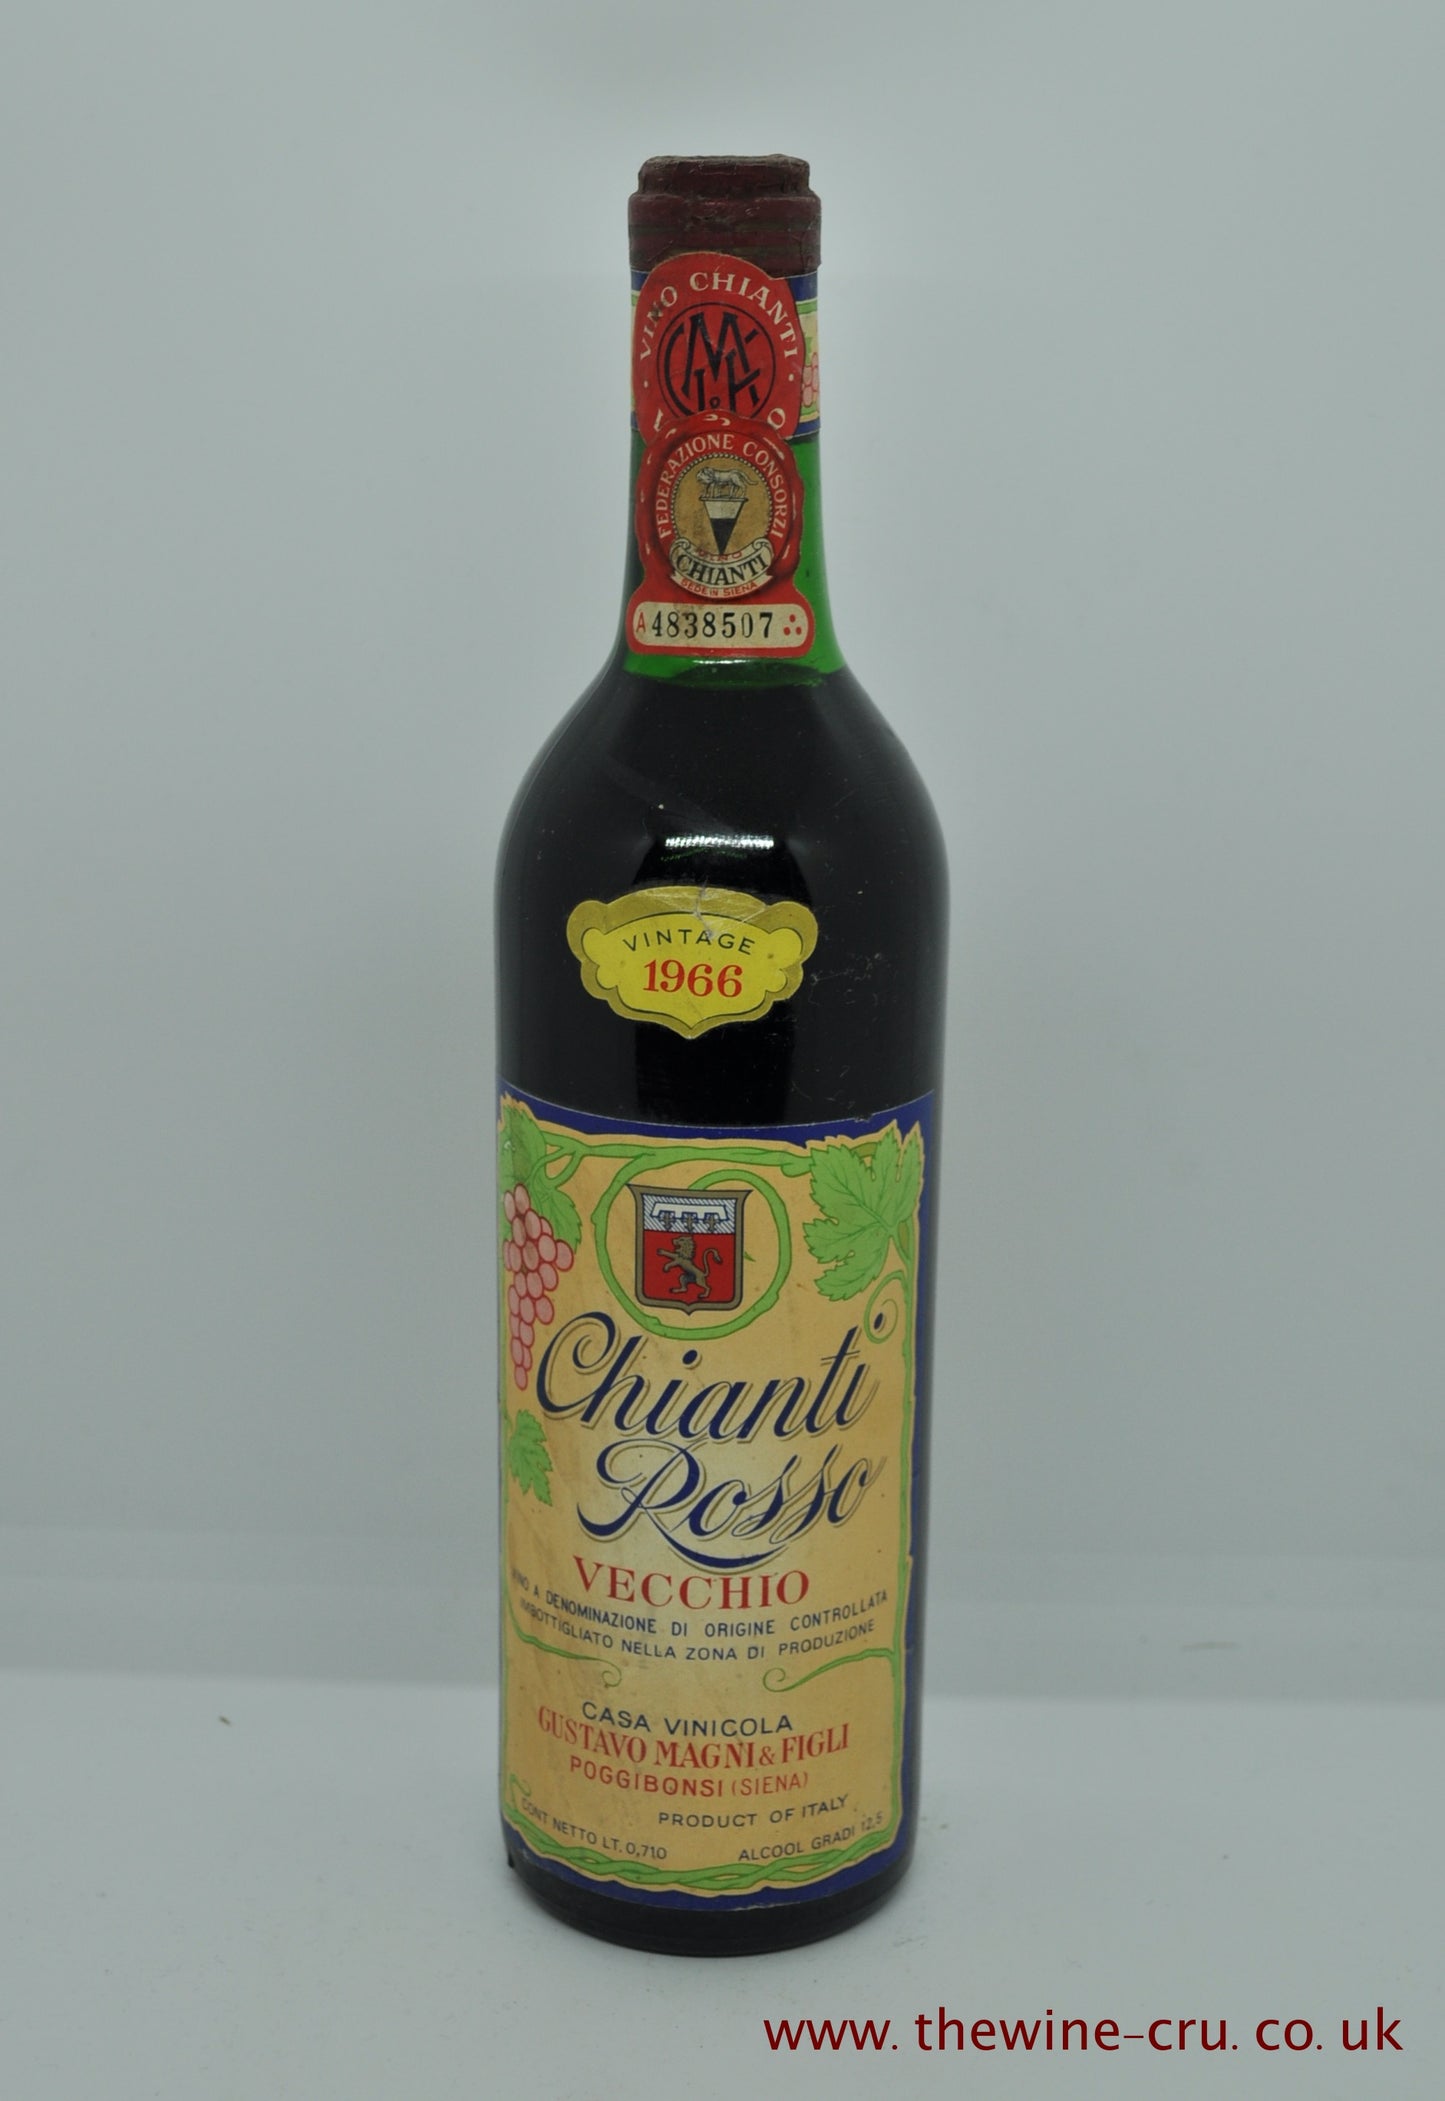 1966 vintage red wine. Chianti Rosso Vecchio Gustavo Magni & Figli. Italy. The bottle is in good condition with the level being top shoulder. Immediate delivery. Free local delivery. Gift wrapping available.